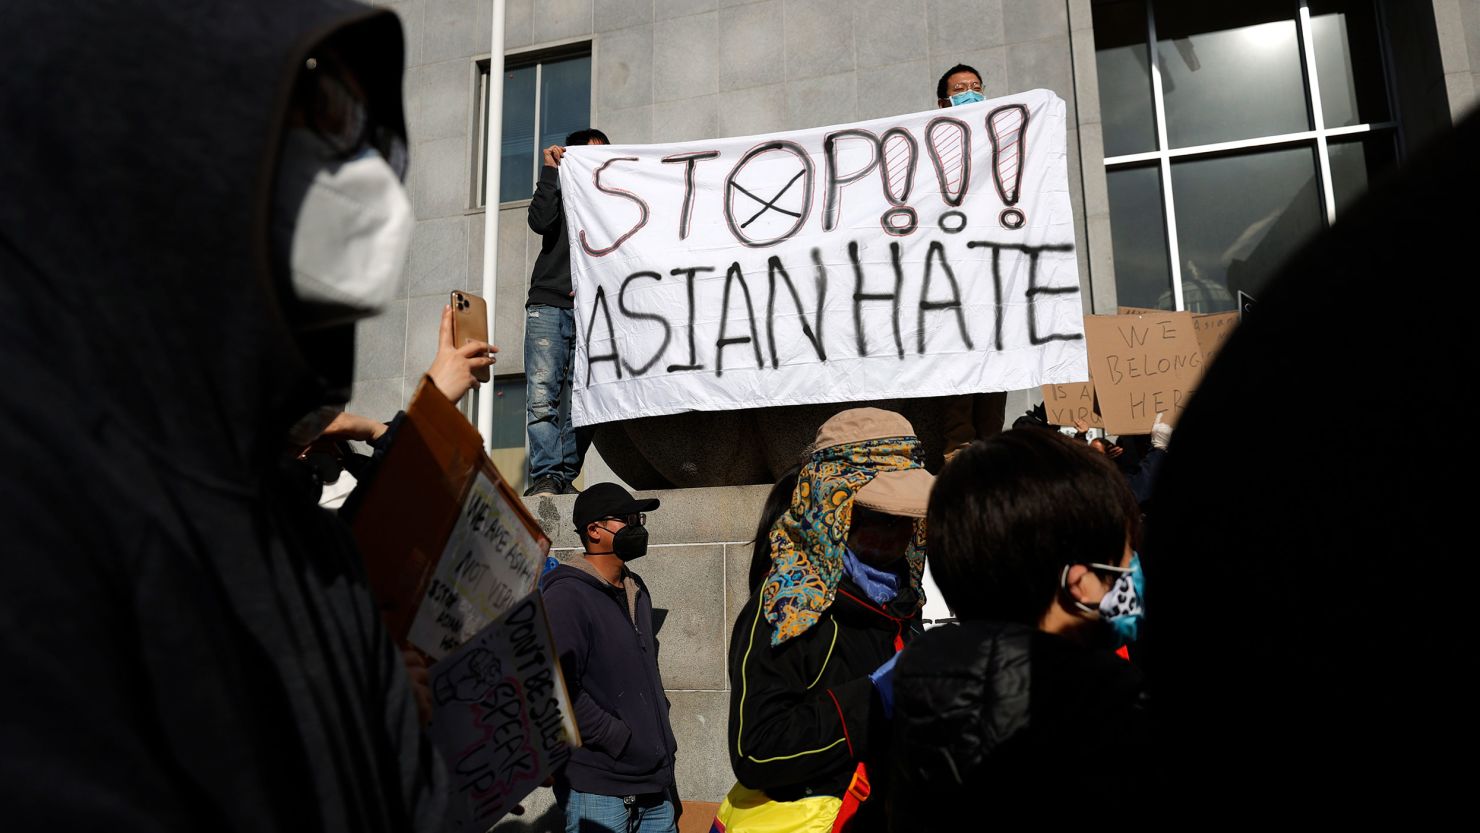 Protesters hold a sign during a rally in solidarity with Asian hate crime victims outside of the San Francisco Hall of Justice on March 22, 2021.